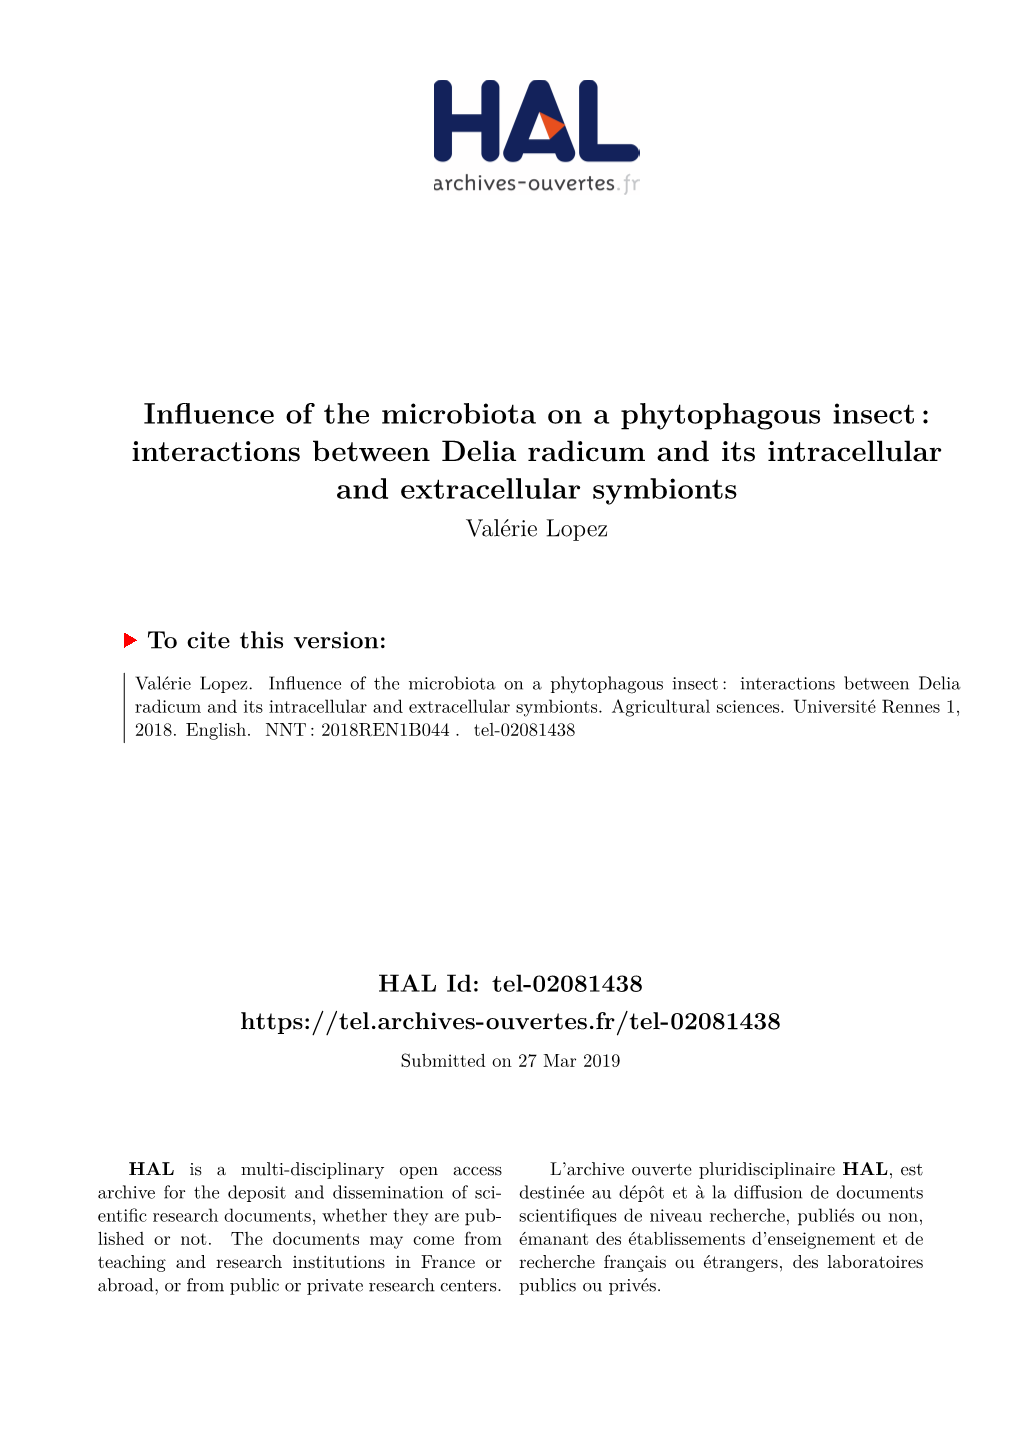 Influence of the Microbiota on a Phytophagous Insect: Interactions Between Delia Radicum and Its Intracellular and Extracellular Symbionts Valérie Lopez